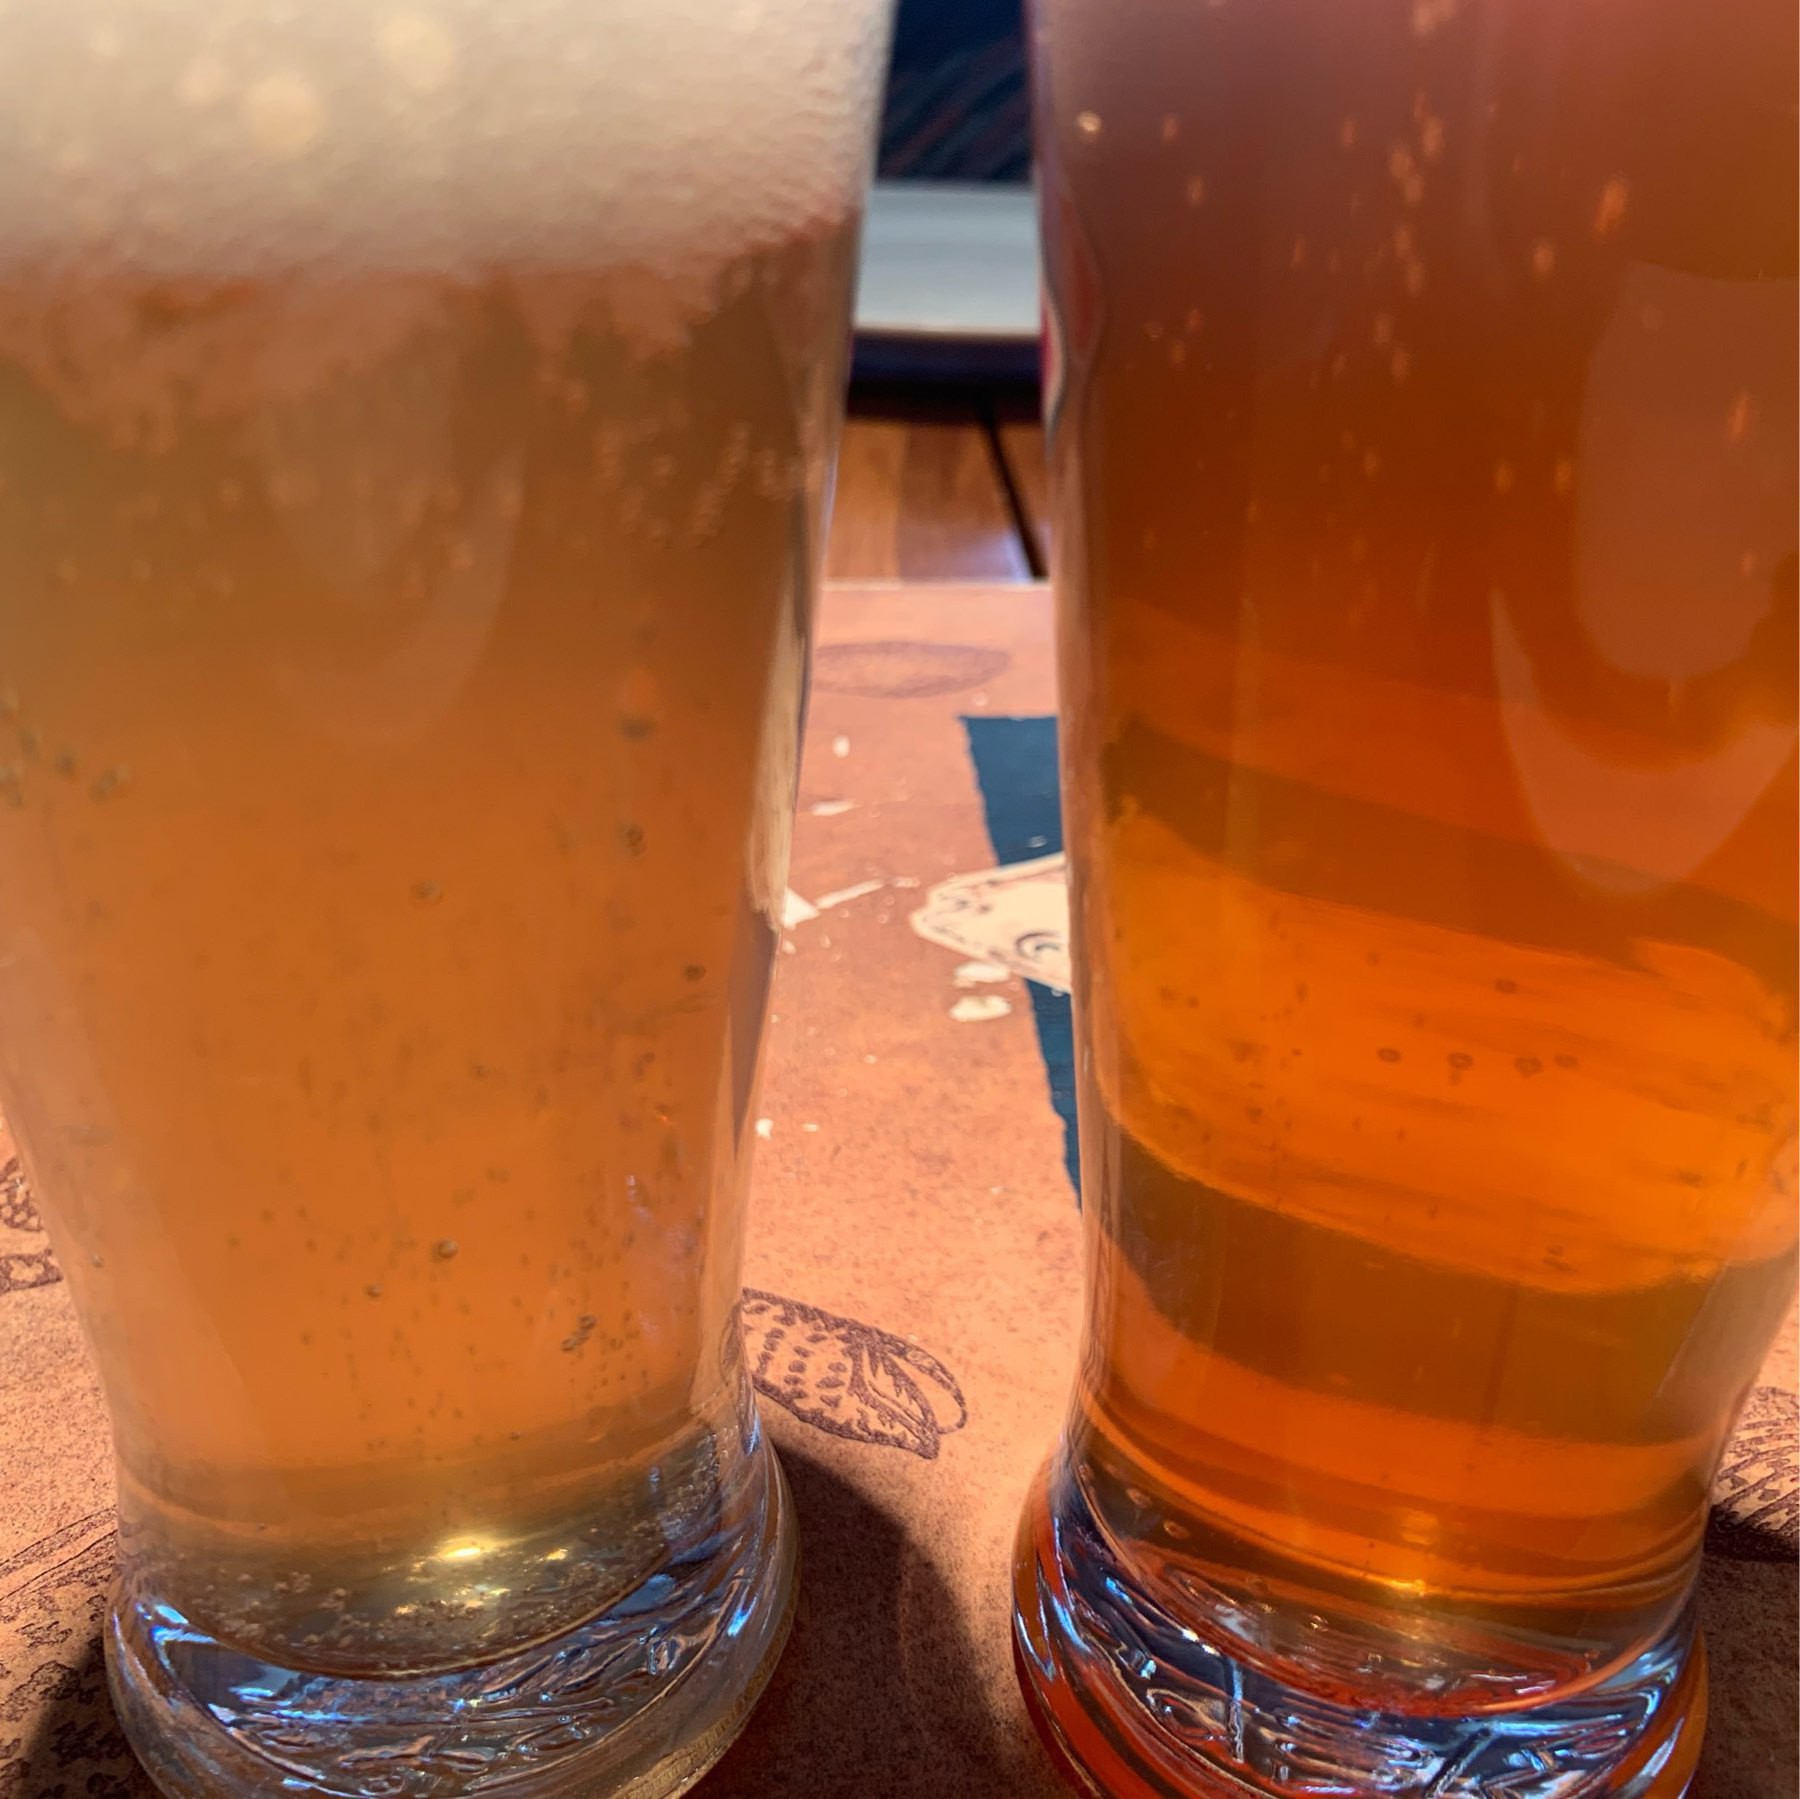 the lime beer on the left is beer uellow, the raspberry infused one on the right is distinctly pink